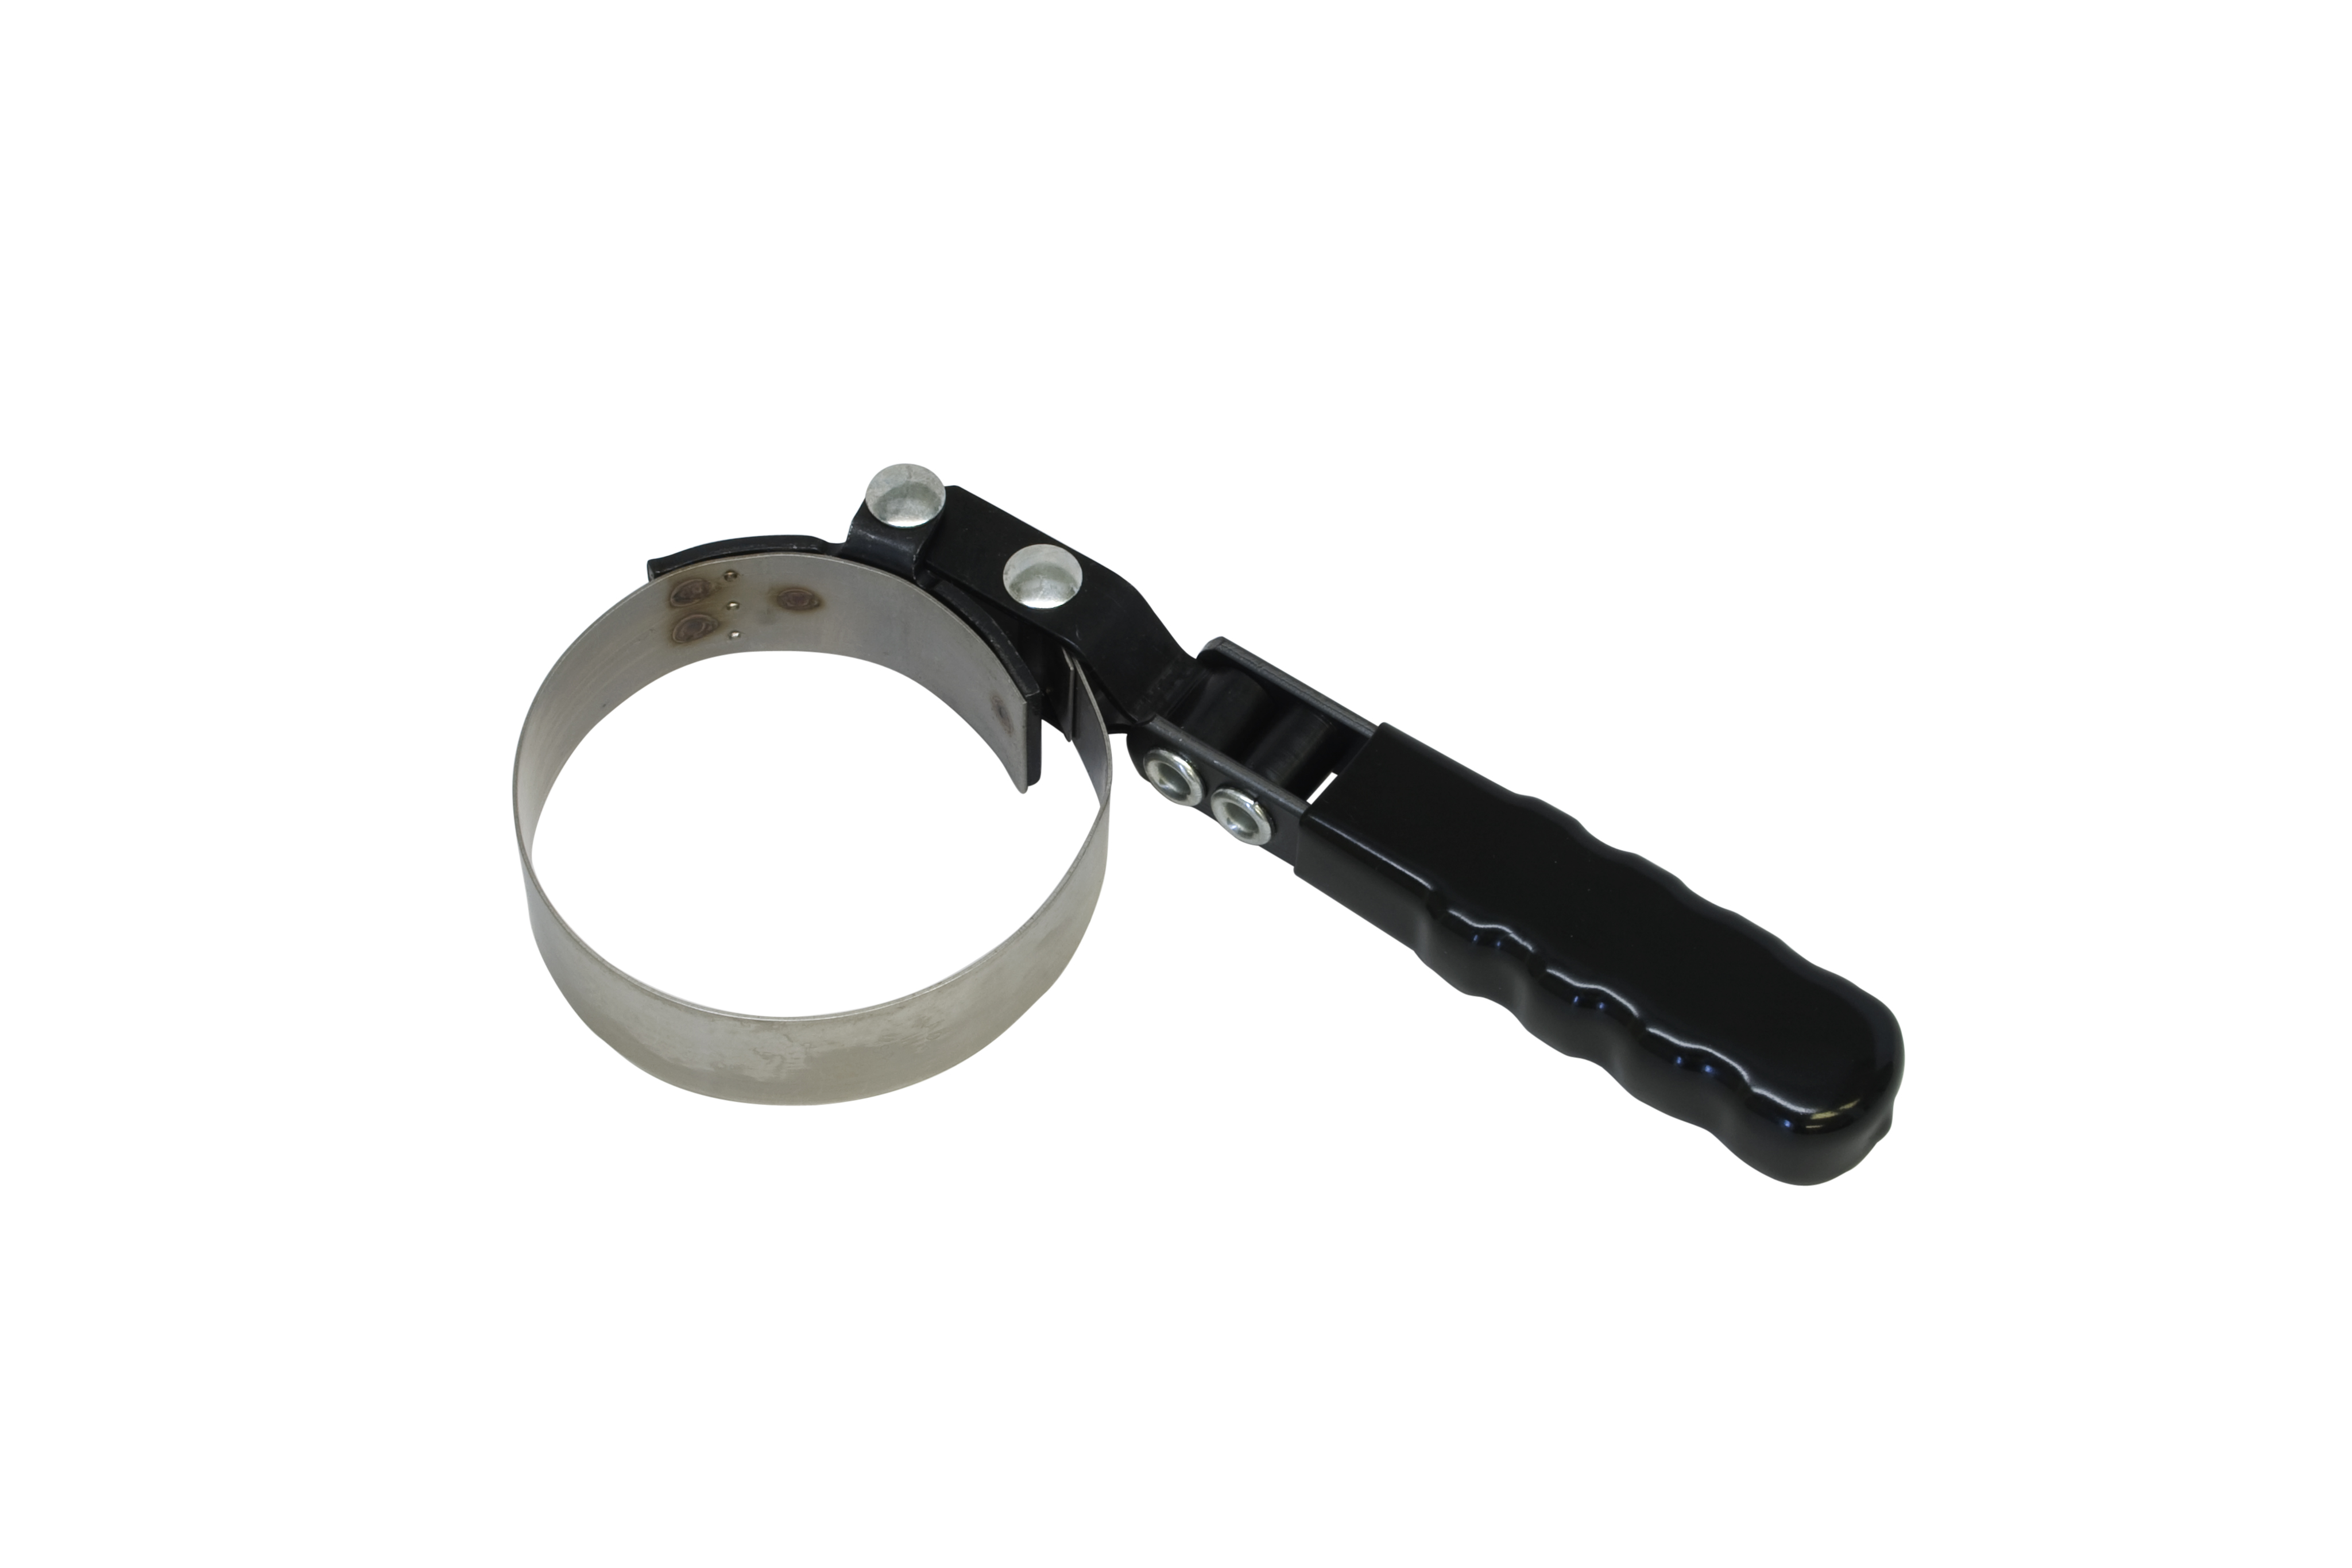 53700 Small Swivel Grip Oil Filter Wrench